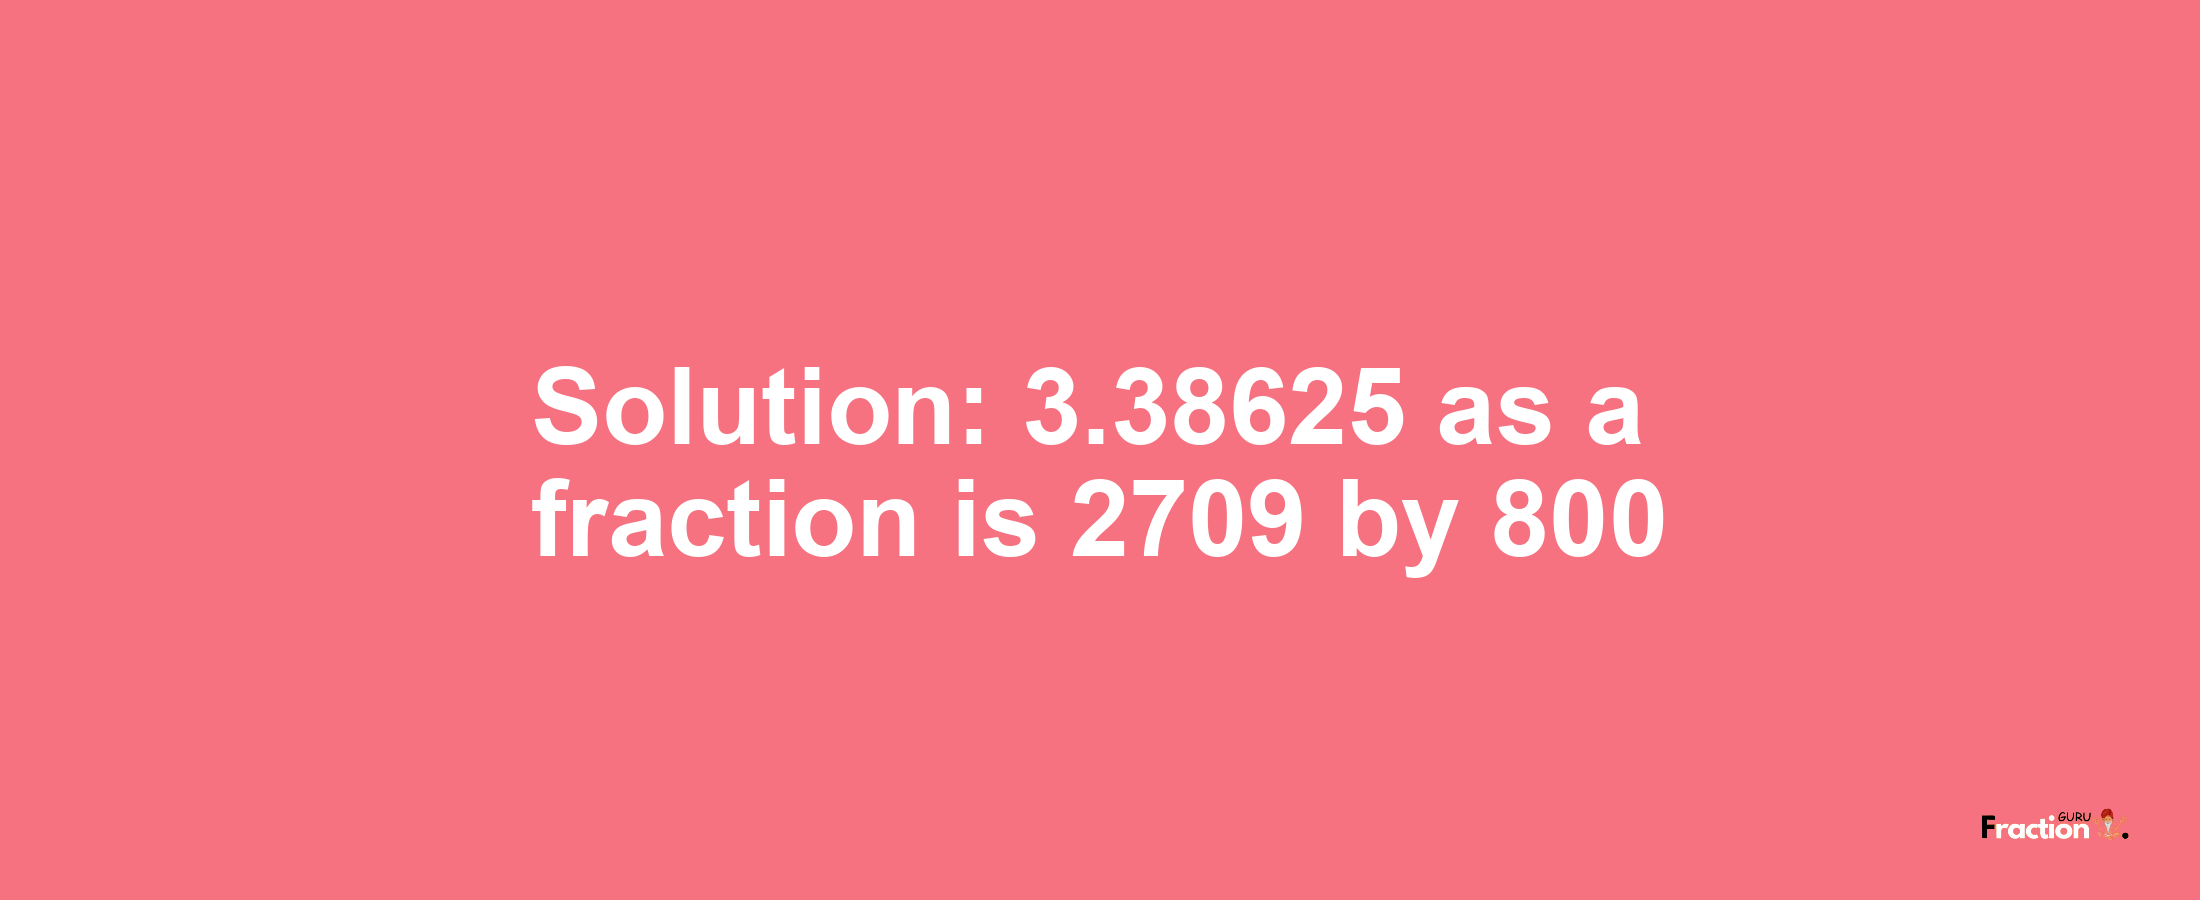 Solution:3.38625 as a fraction is 2709/800